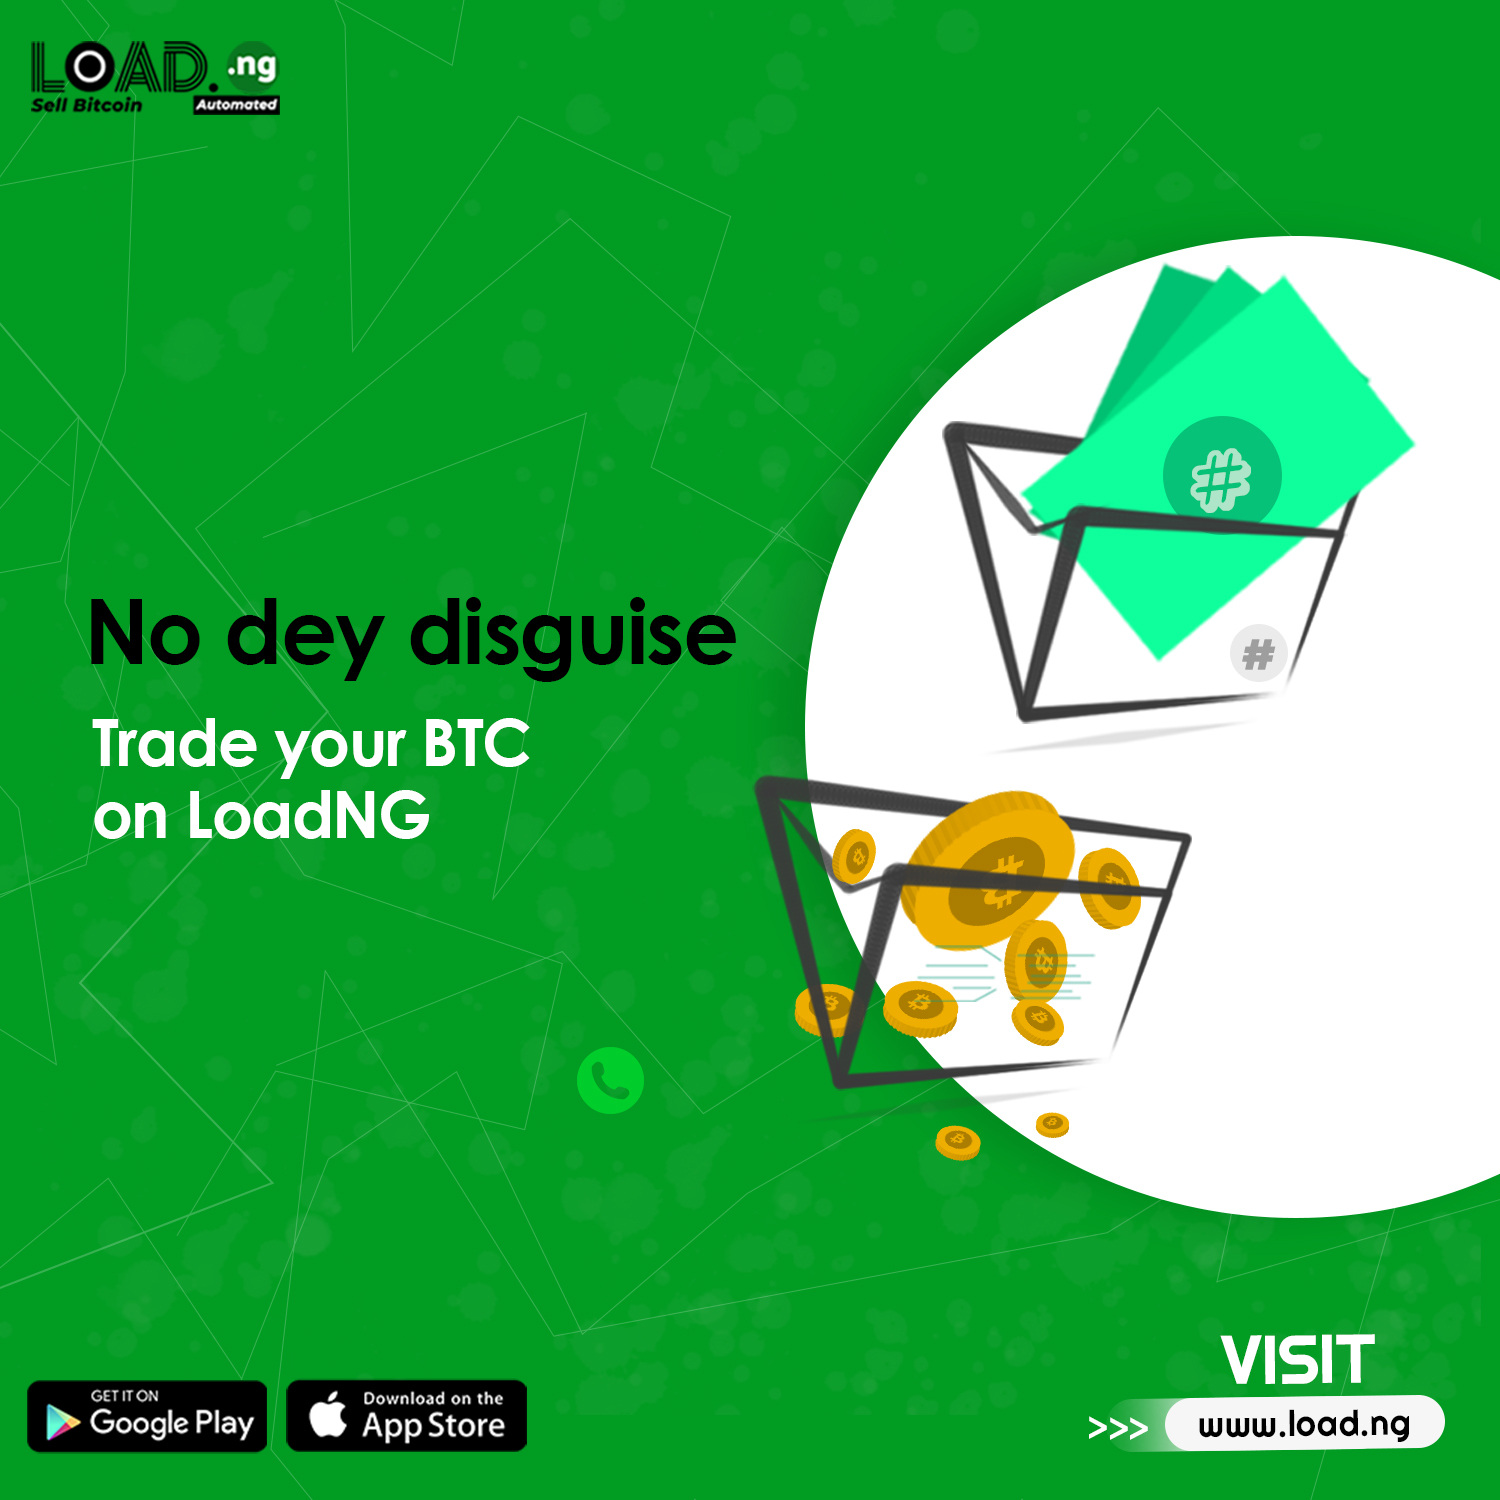 AbikoFX: Evolution Of Digital Currency And Future Of Bitcoin To Naira